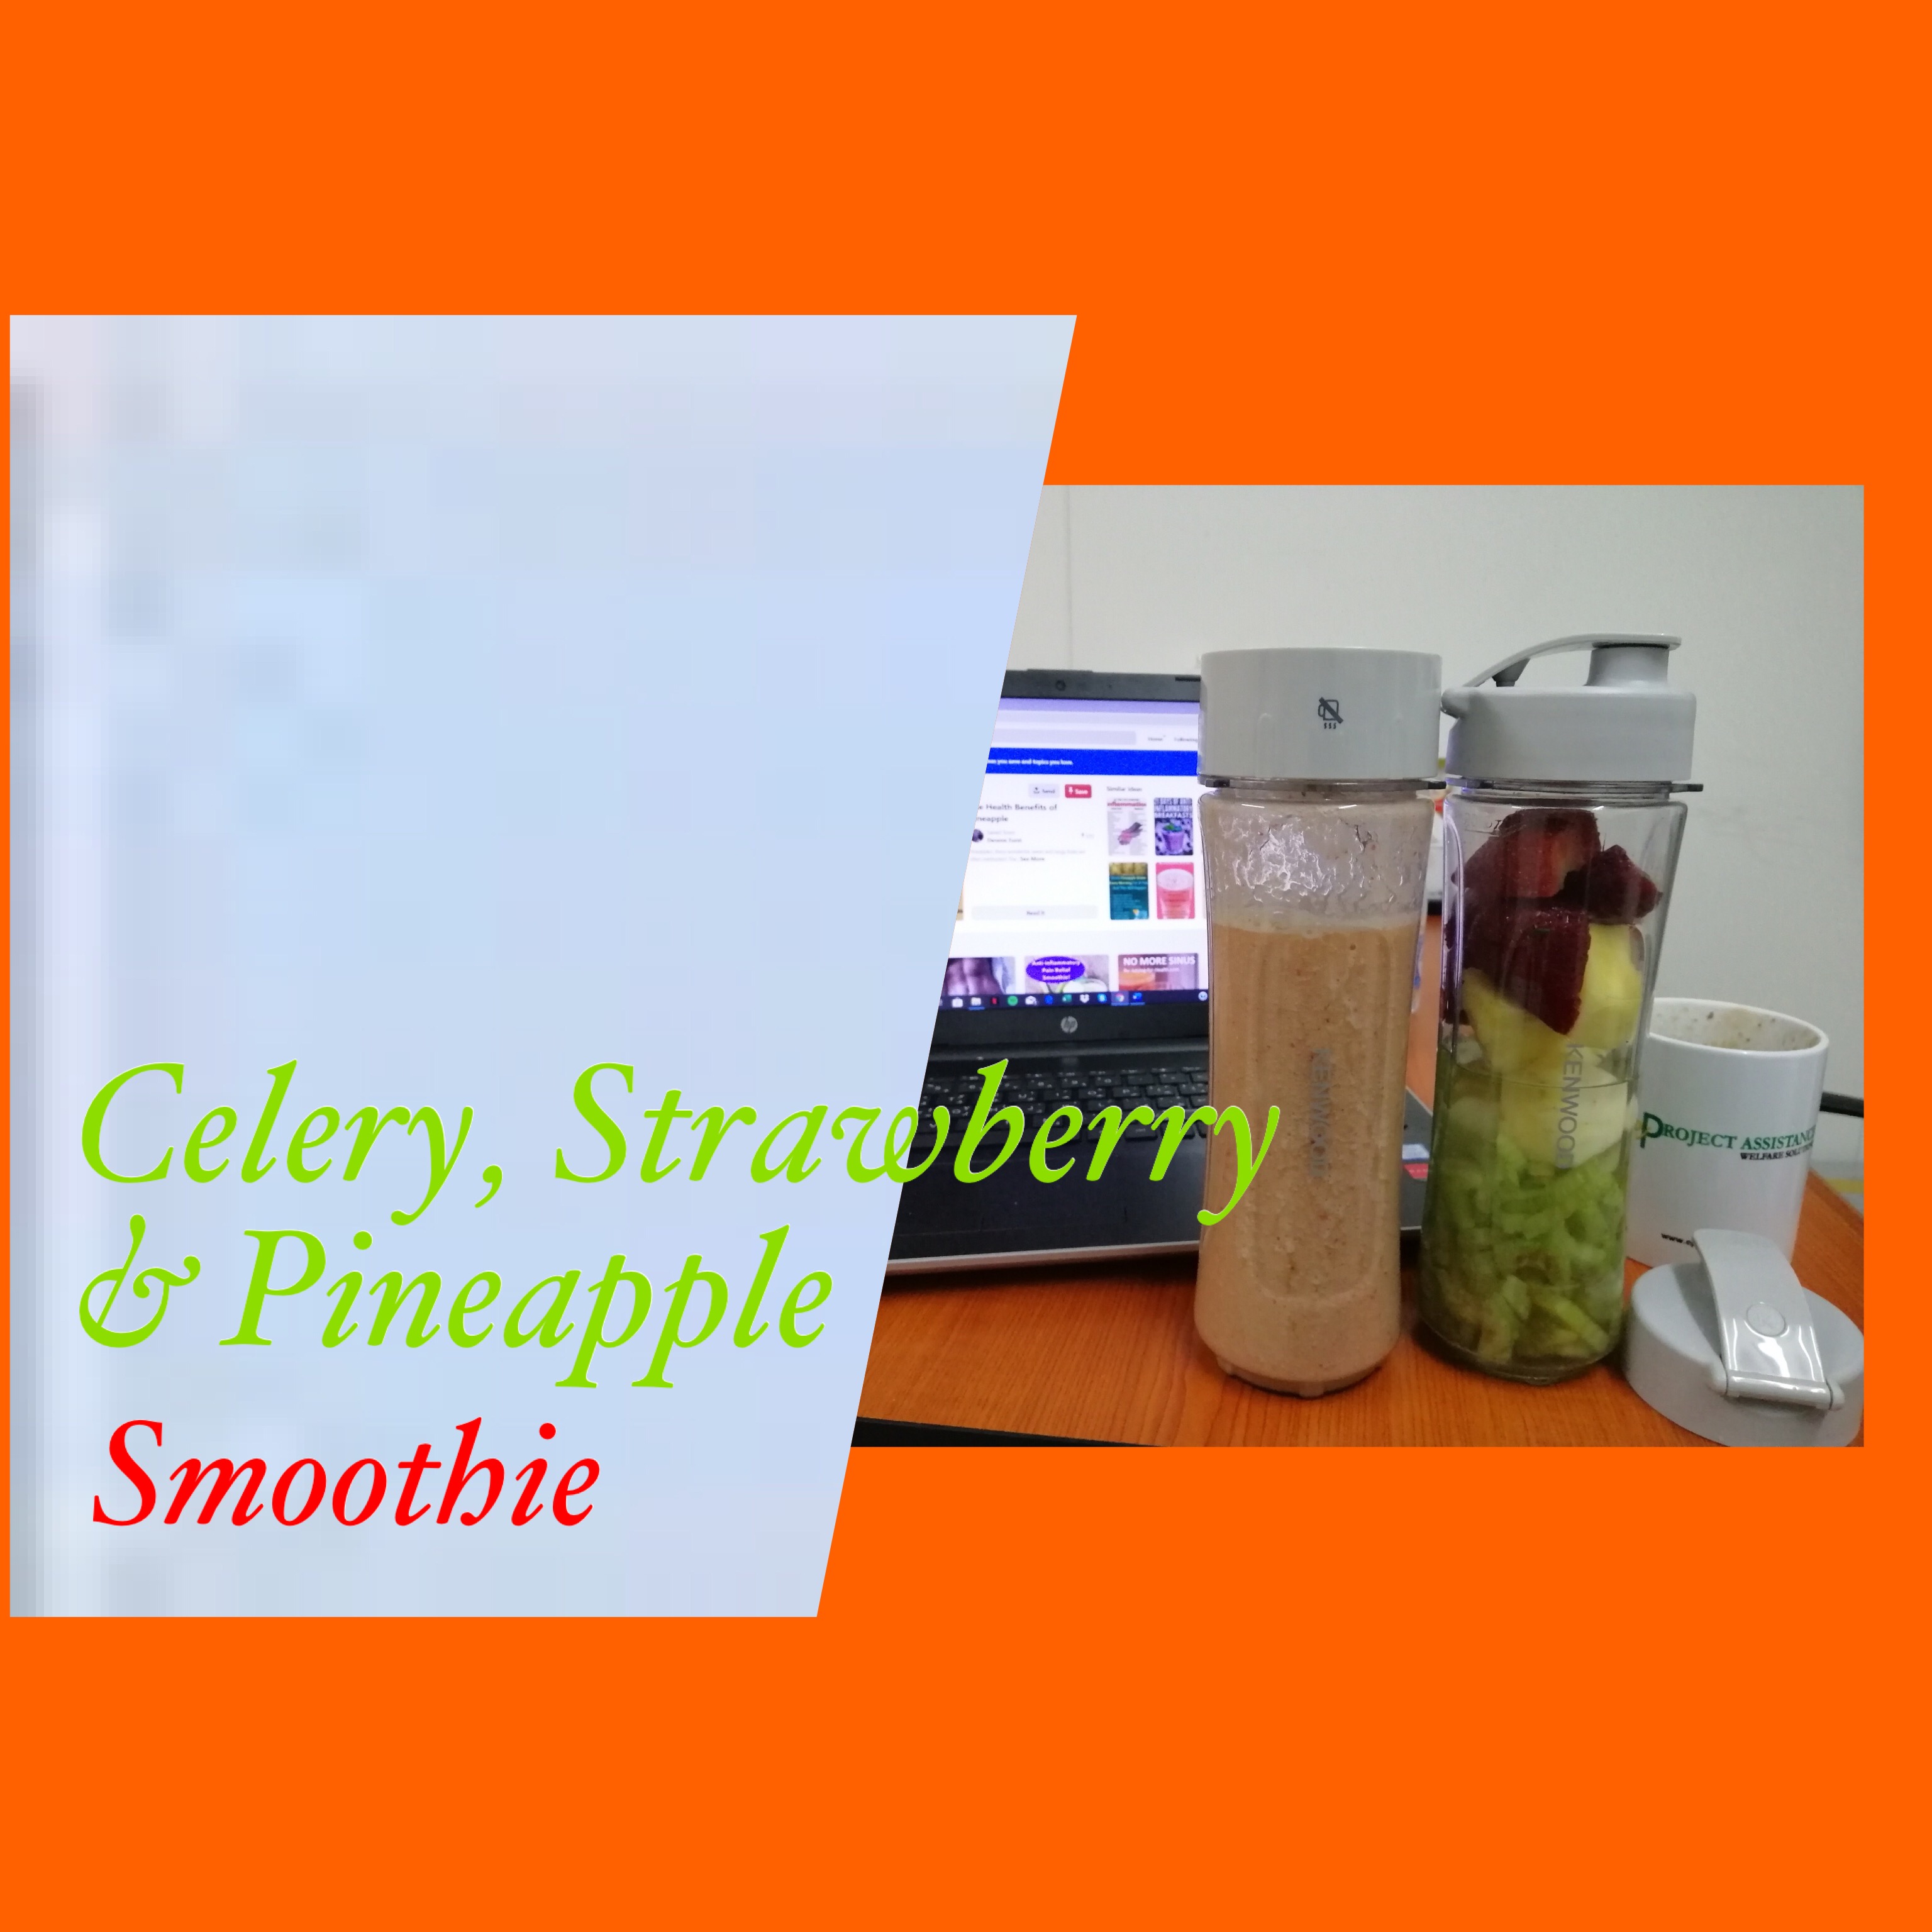 Celery, Strawberry and Pineapple Smoothie